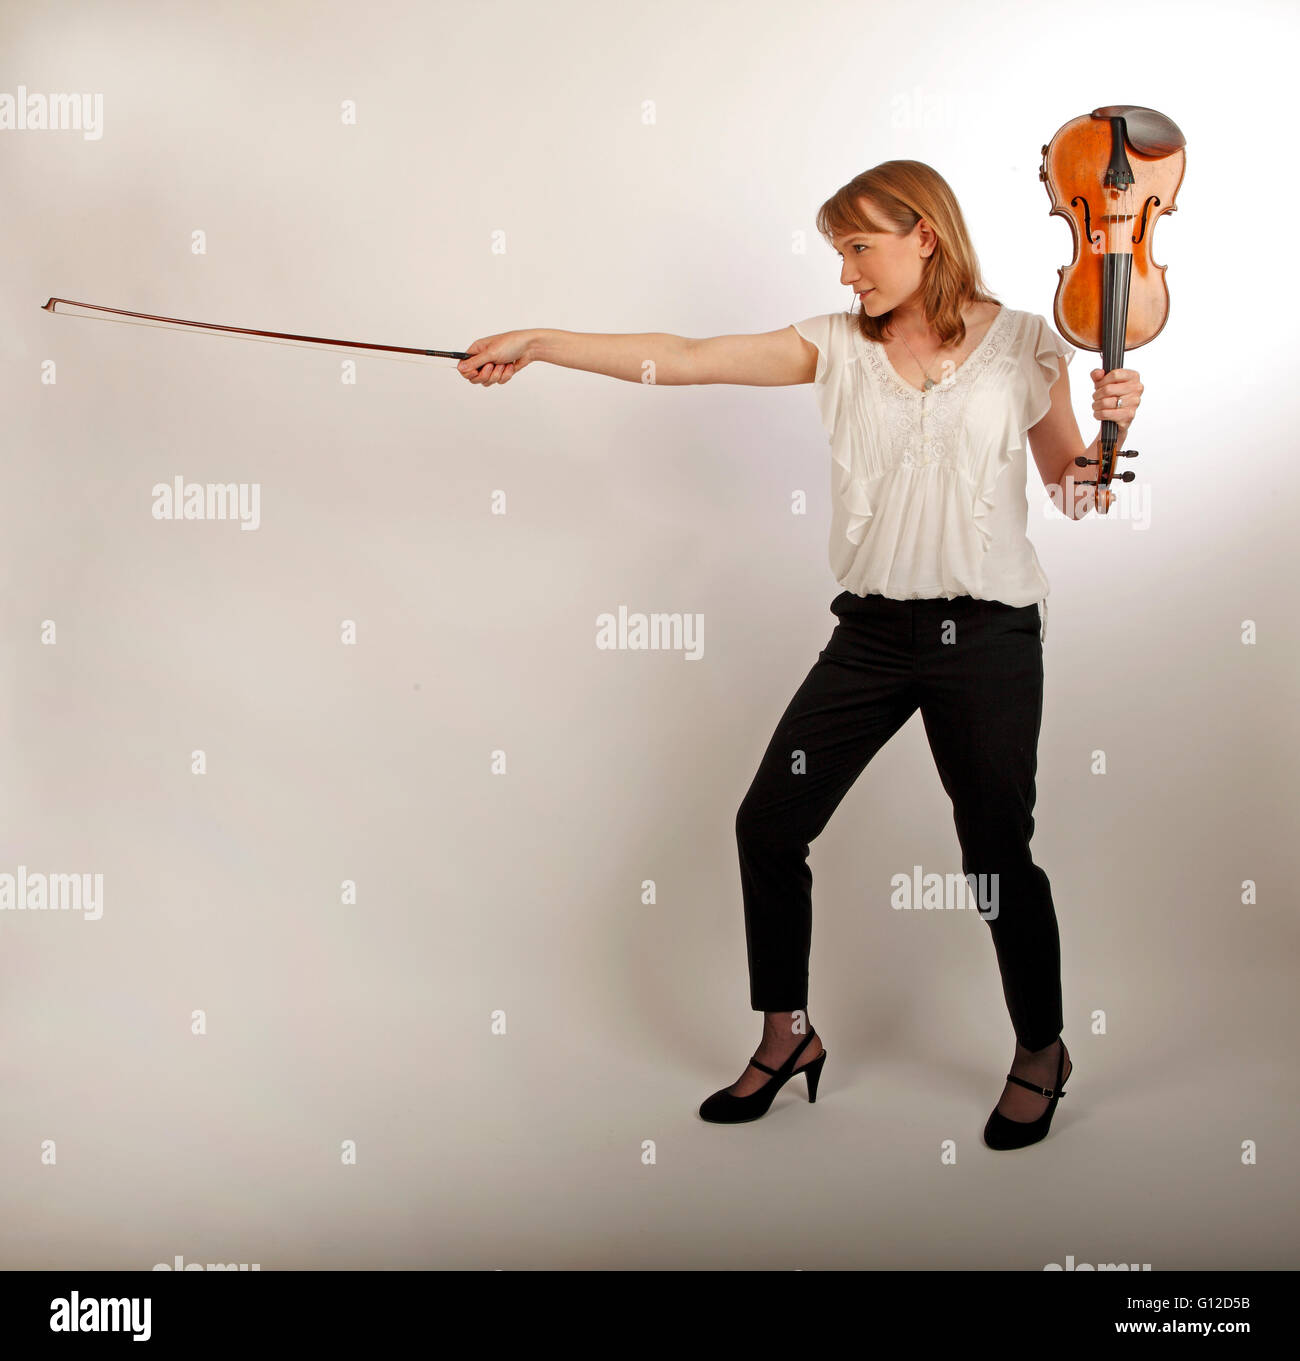 young woman holding a violin and bow like a sword and shield Stock Photo